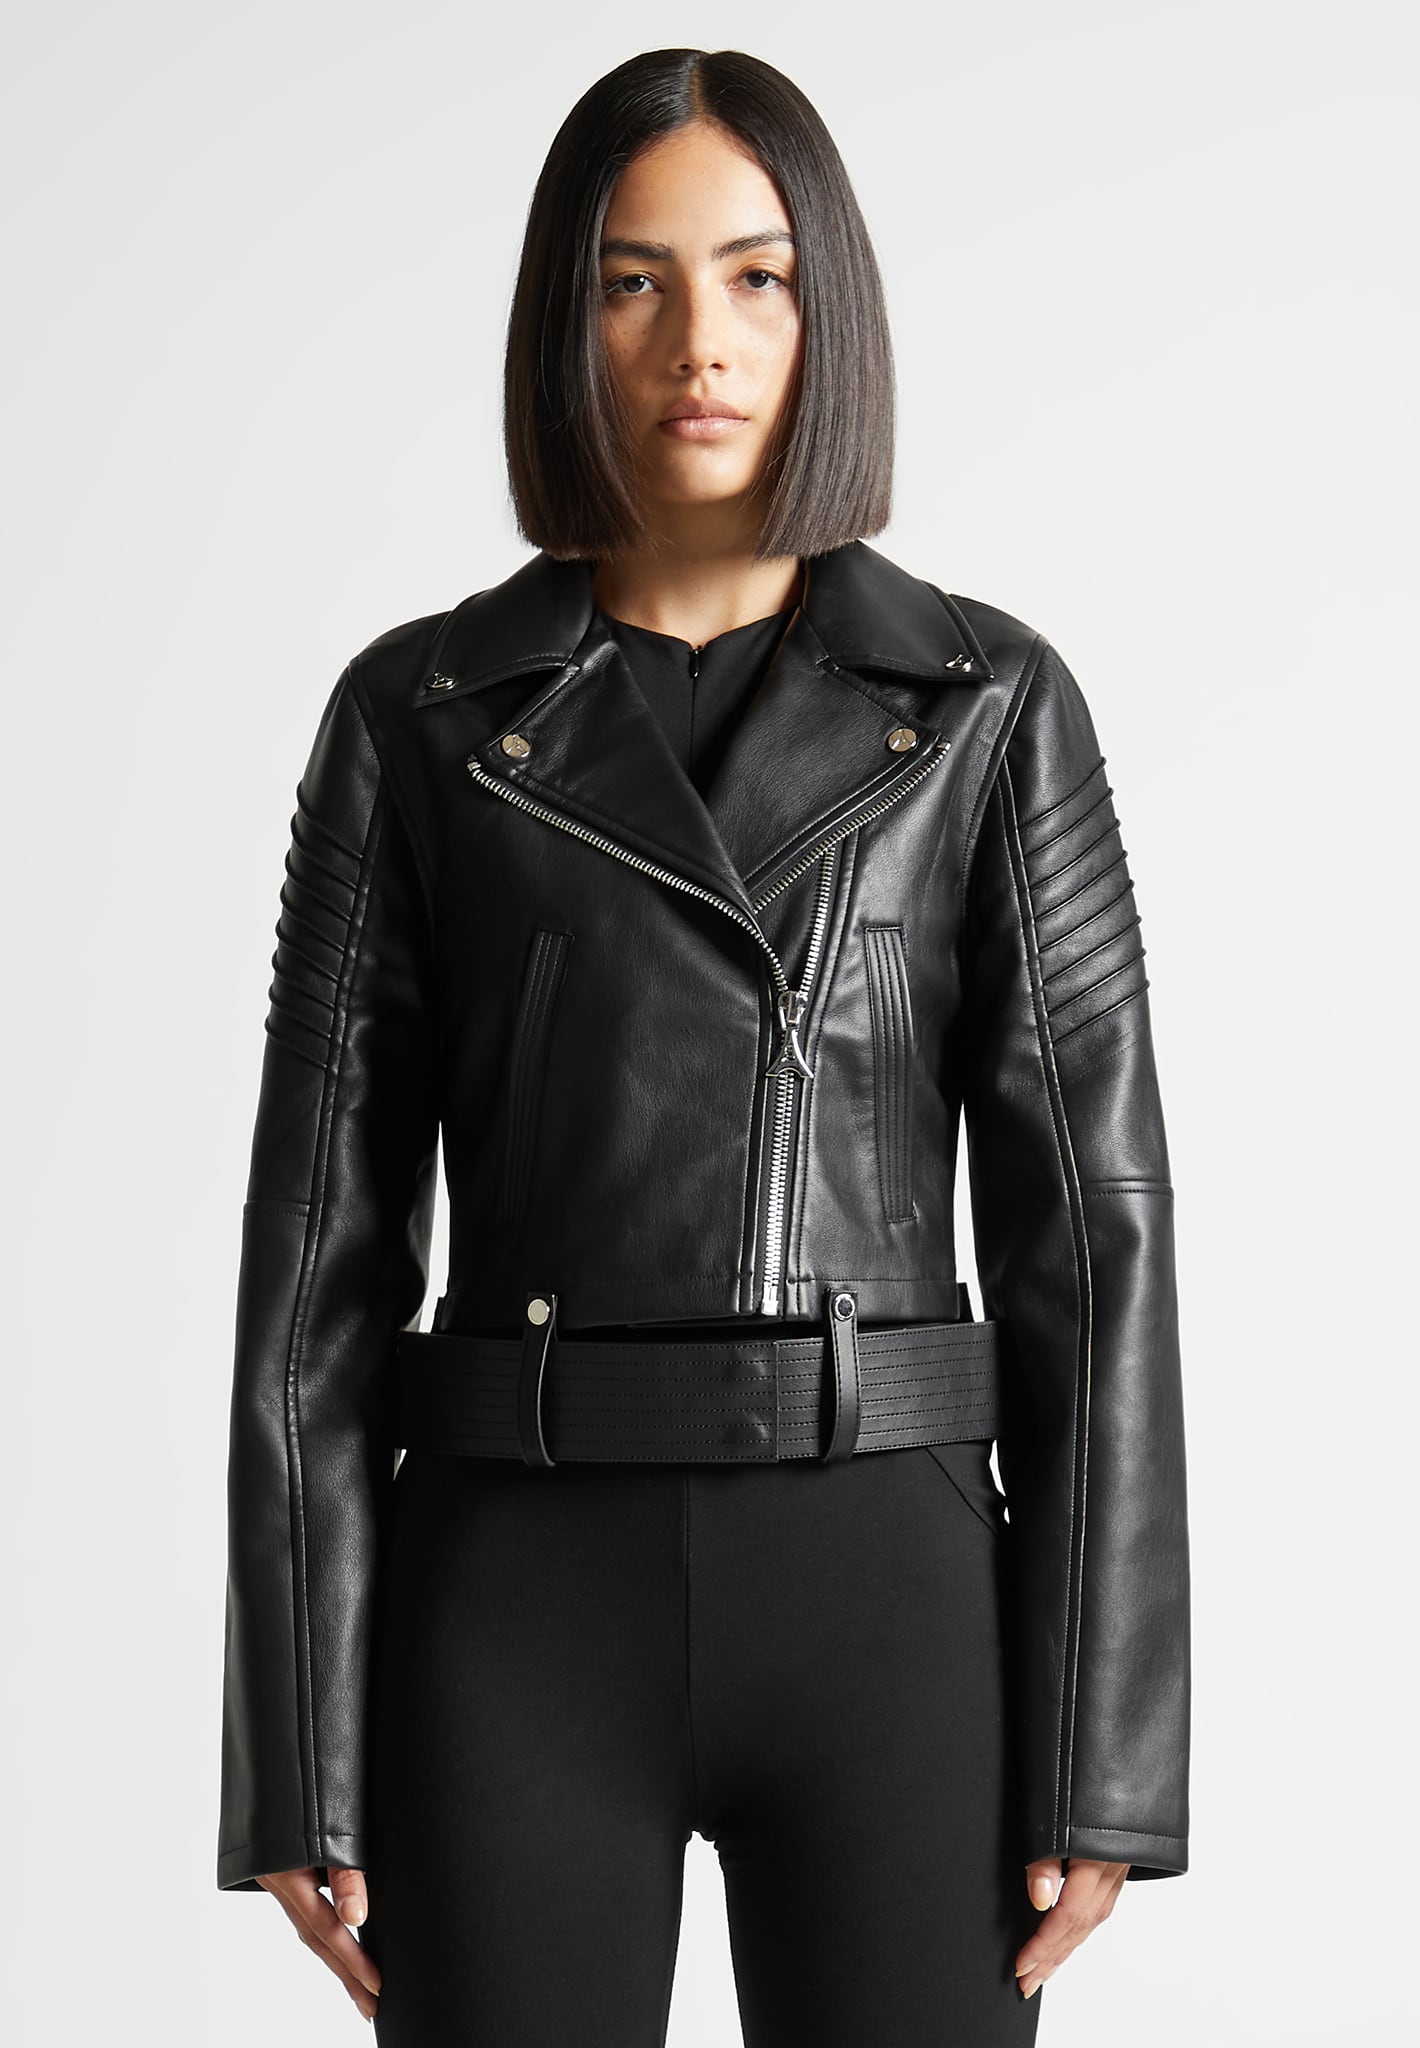 Lee Cooper Leather Jacket On Sale For Men And Women - William Jacket